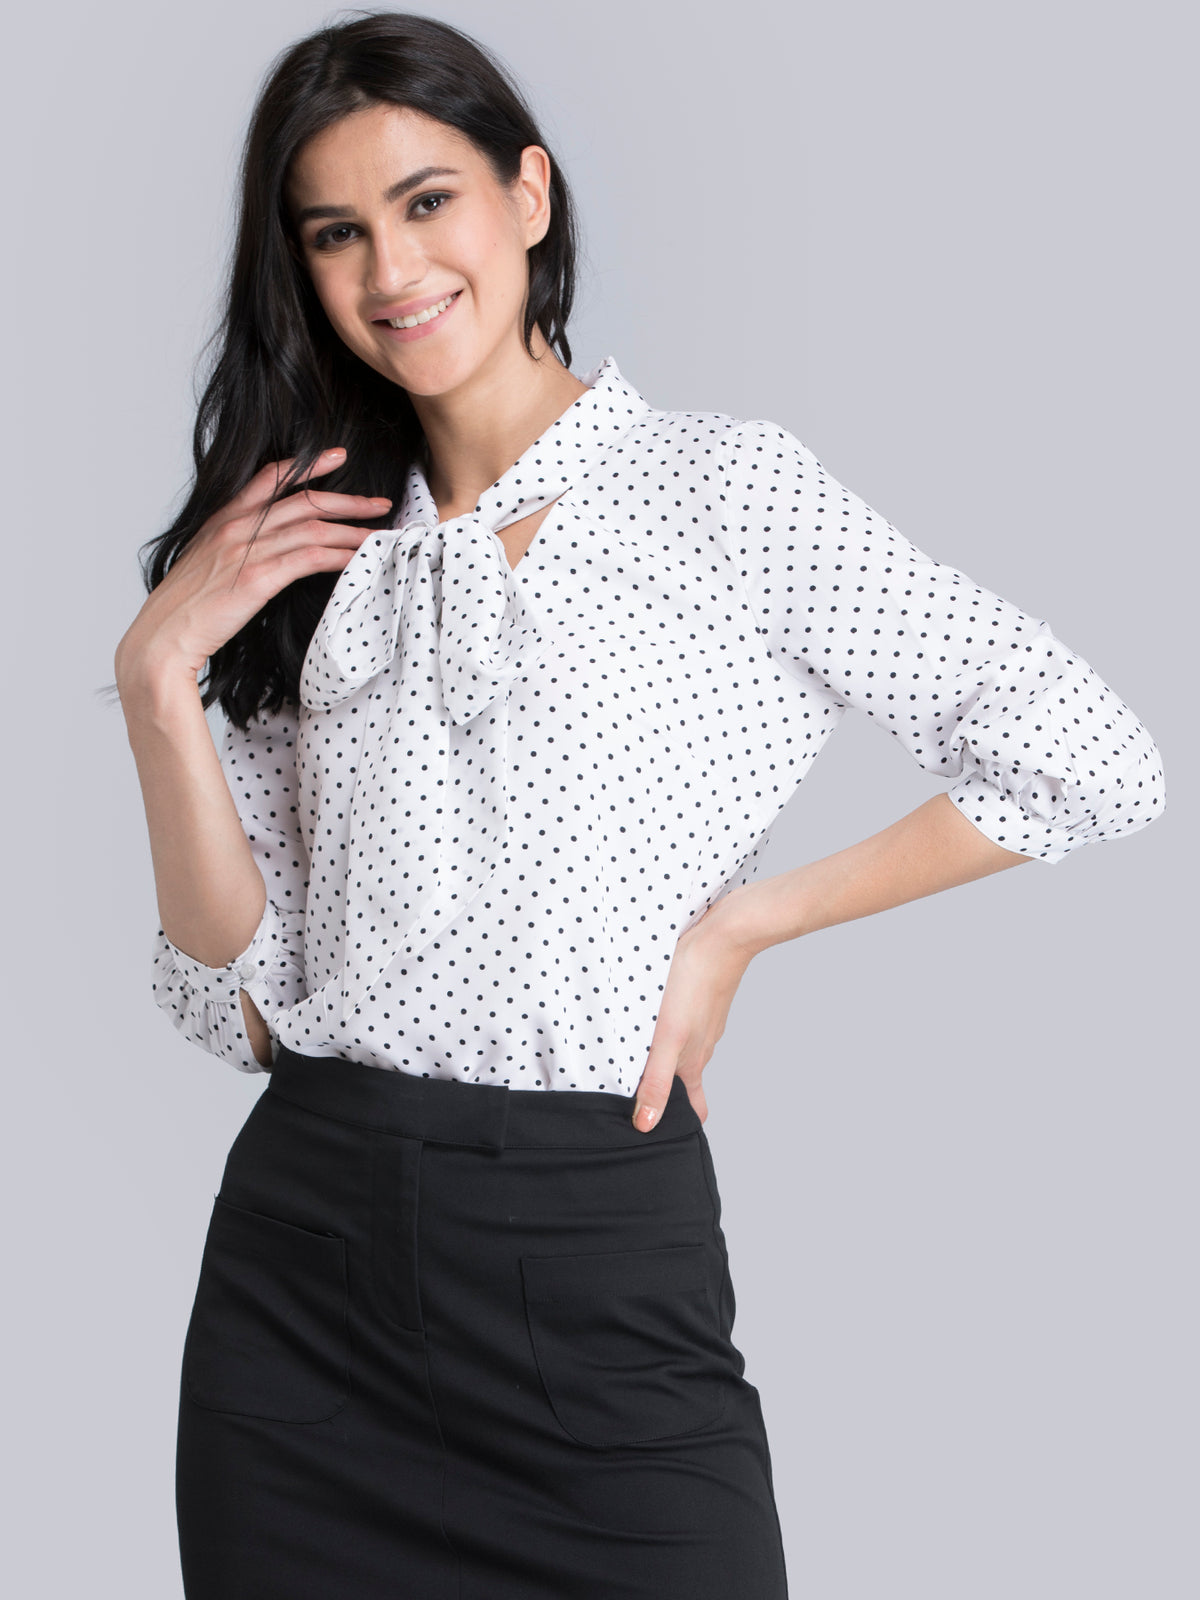 Bow Neck Polka Top - White and Black